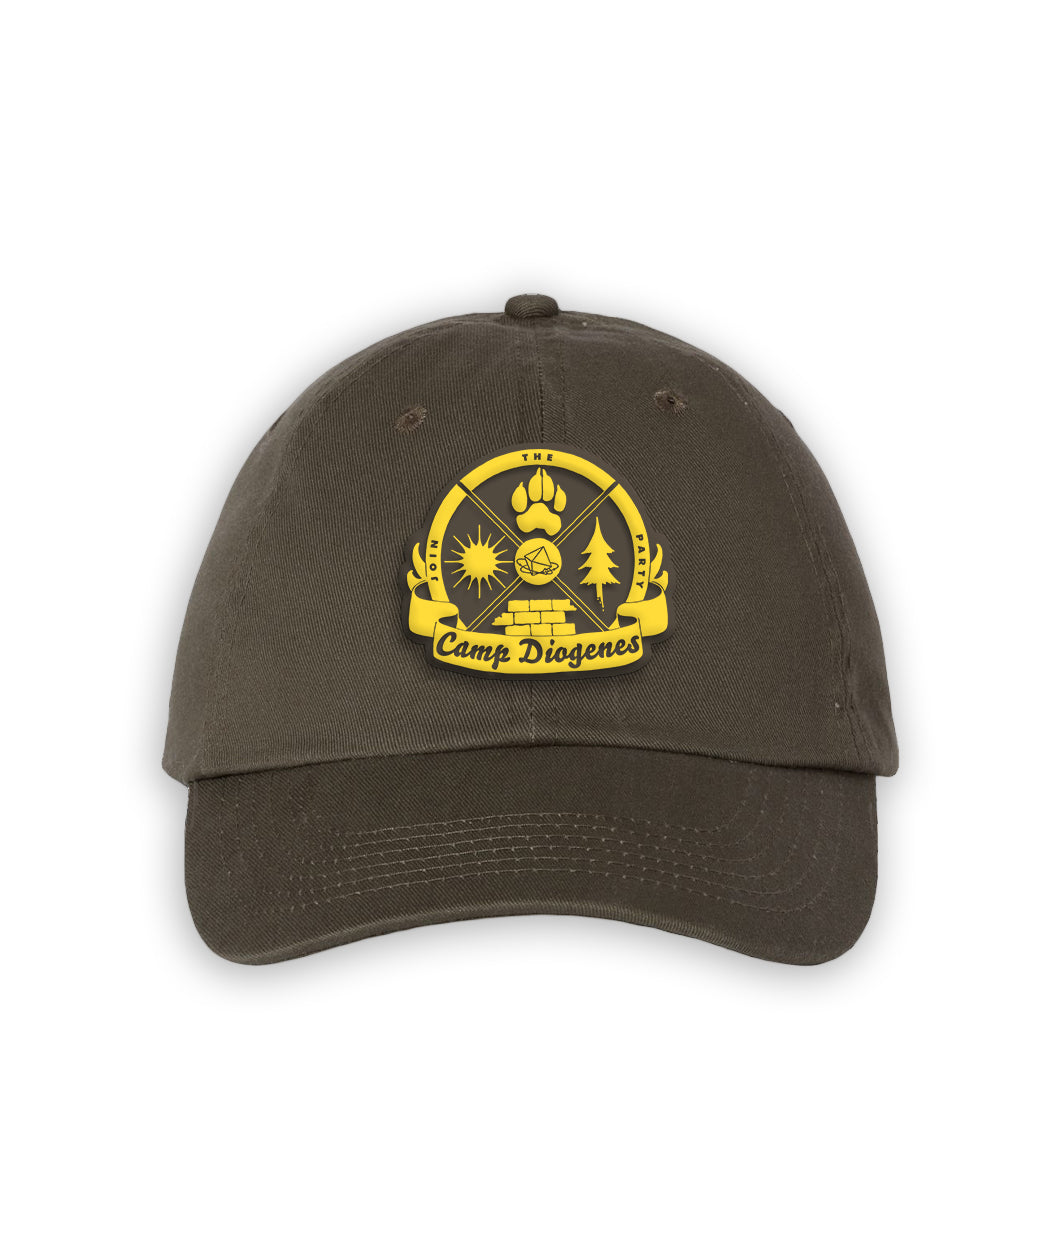 Dark green dad hat with a yellow crest patch that reads "Camp Diogenes" and has a paw print, tree, sun and wall icons as well as the Join the Party logo in the center.